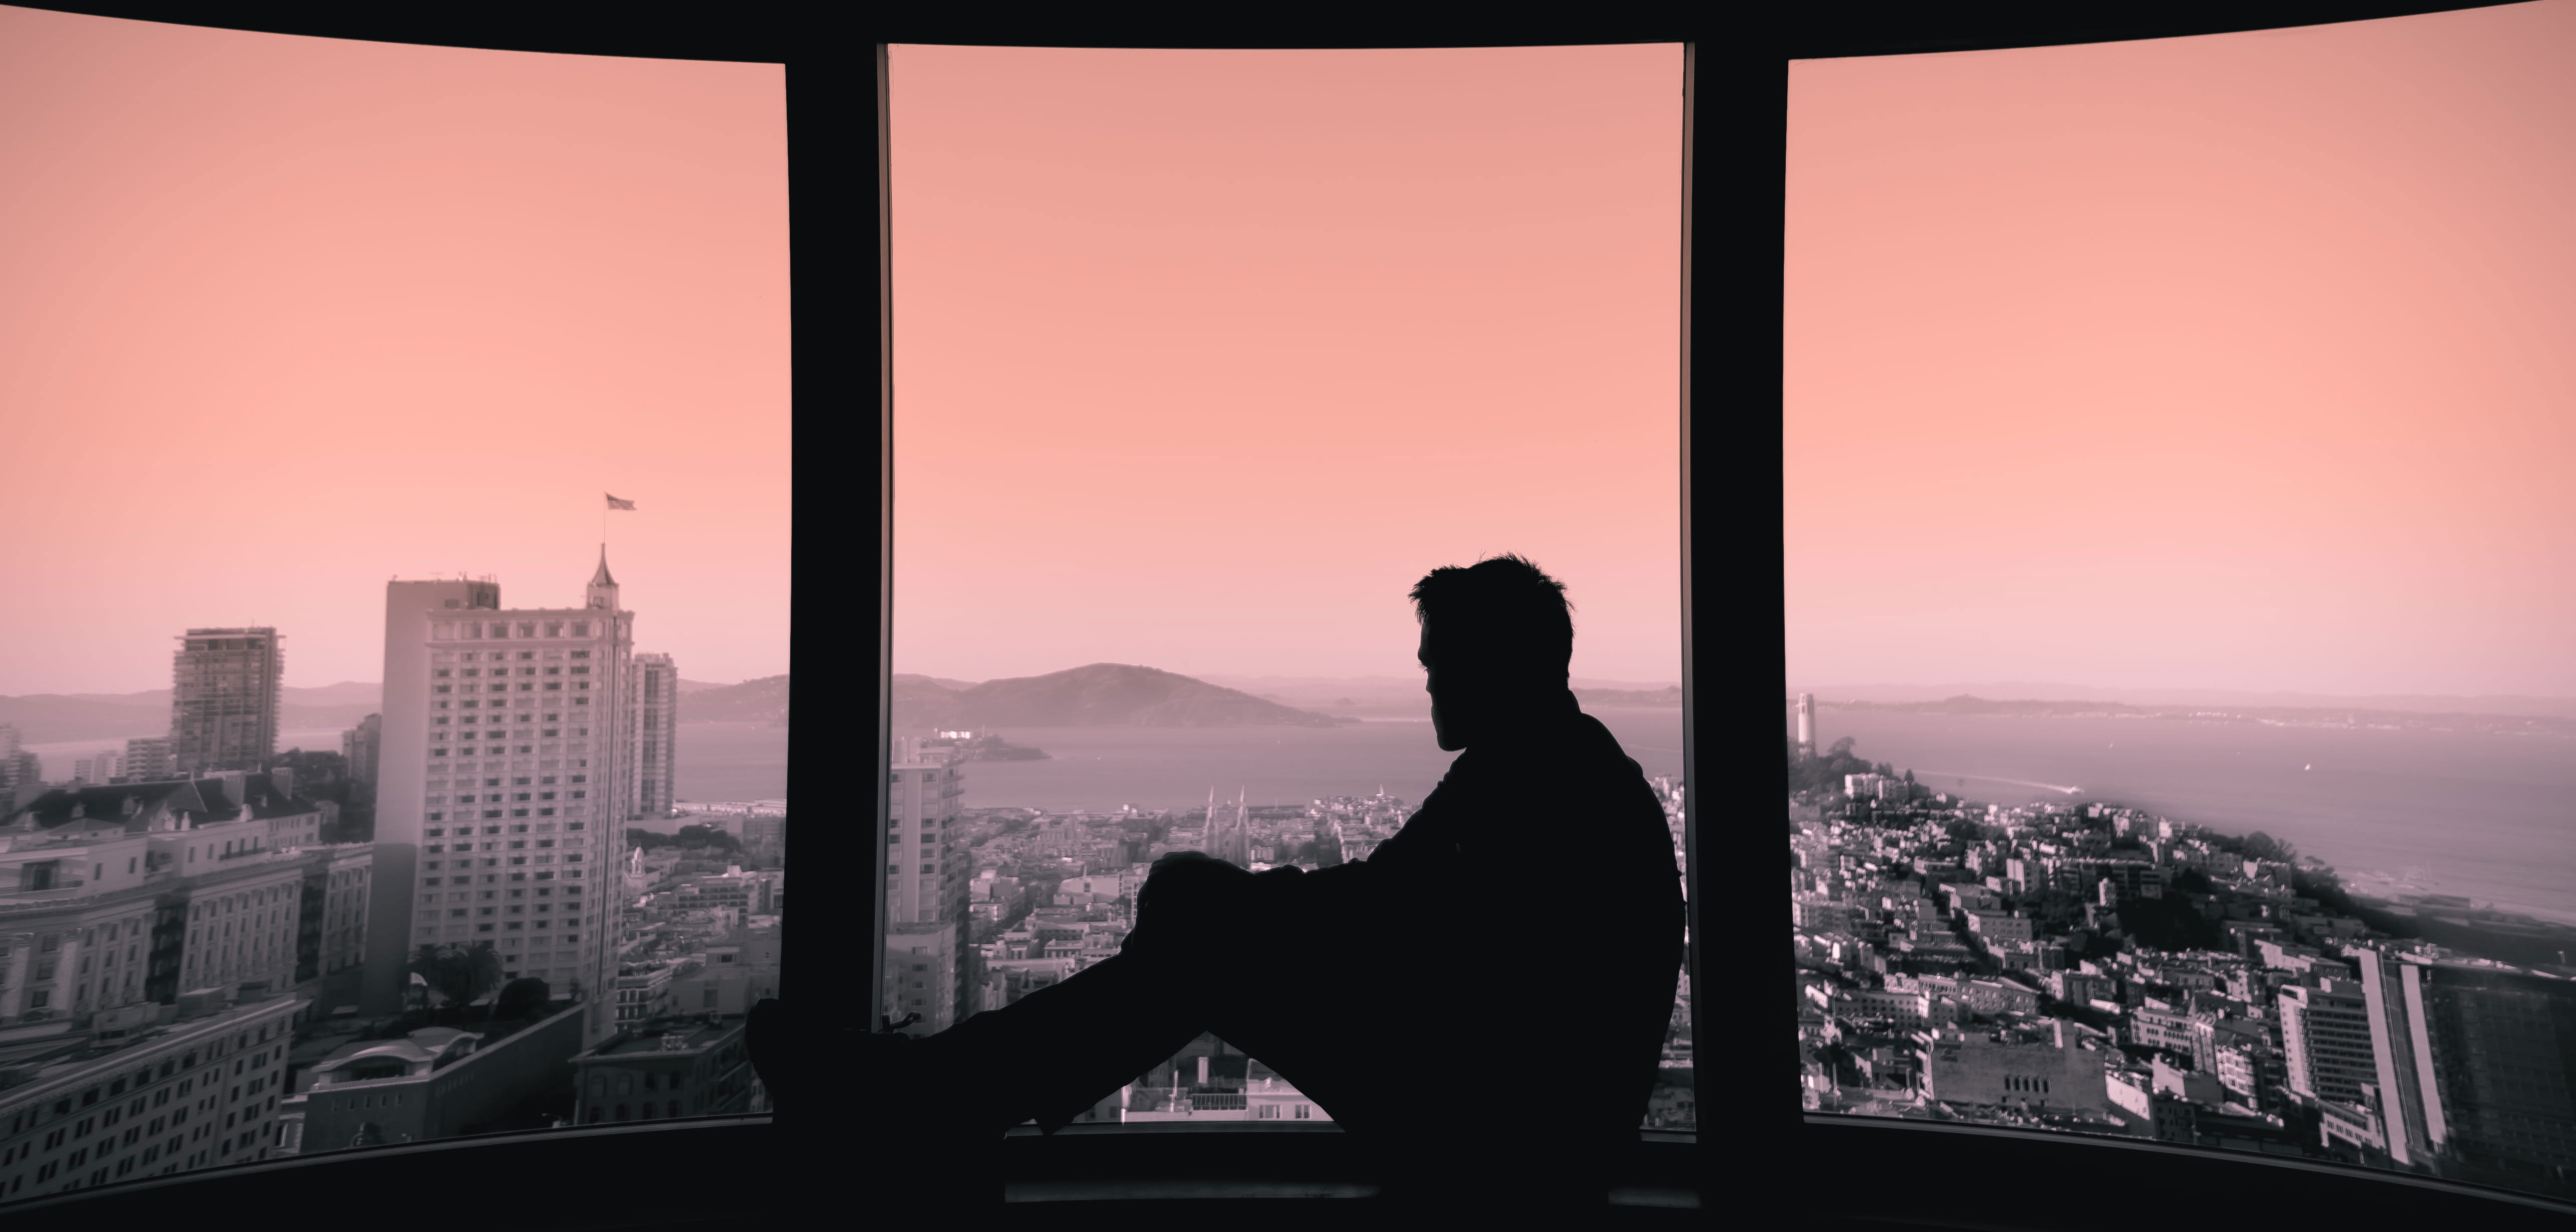 Wallpaper Silhouette Of Person Sitting On Building's Windows, Pastel, Aesthetic